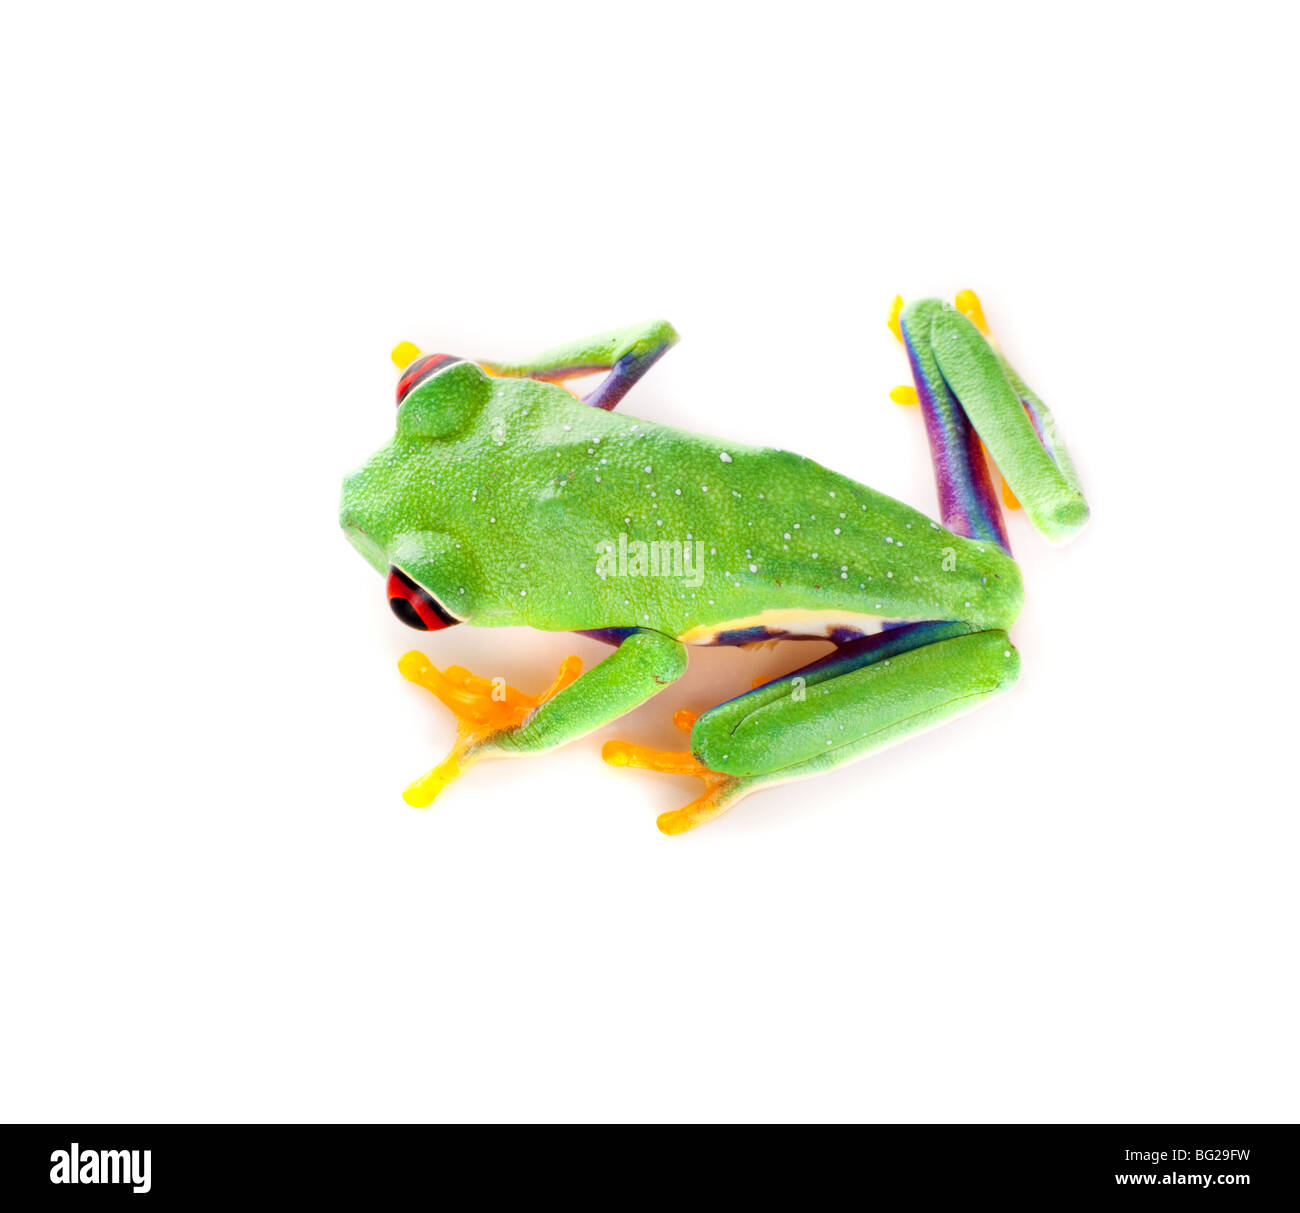 Red eyed tree frog isolated on white Banque D'Images